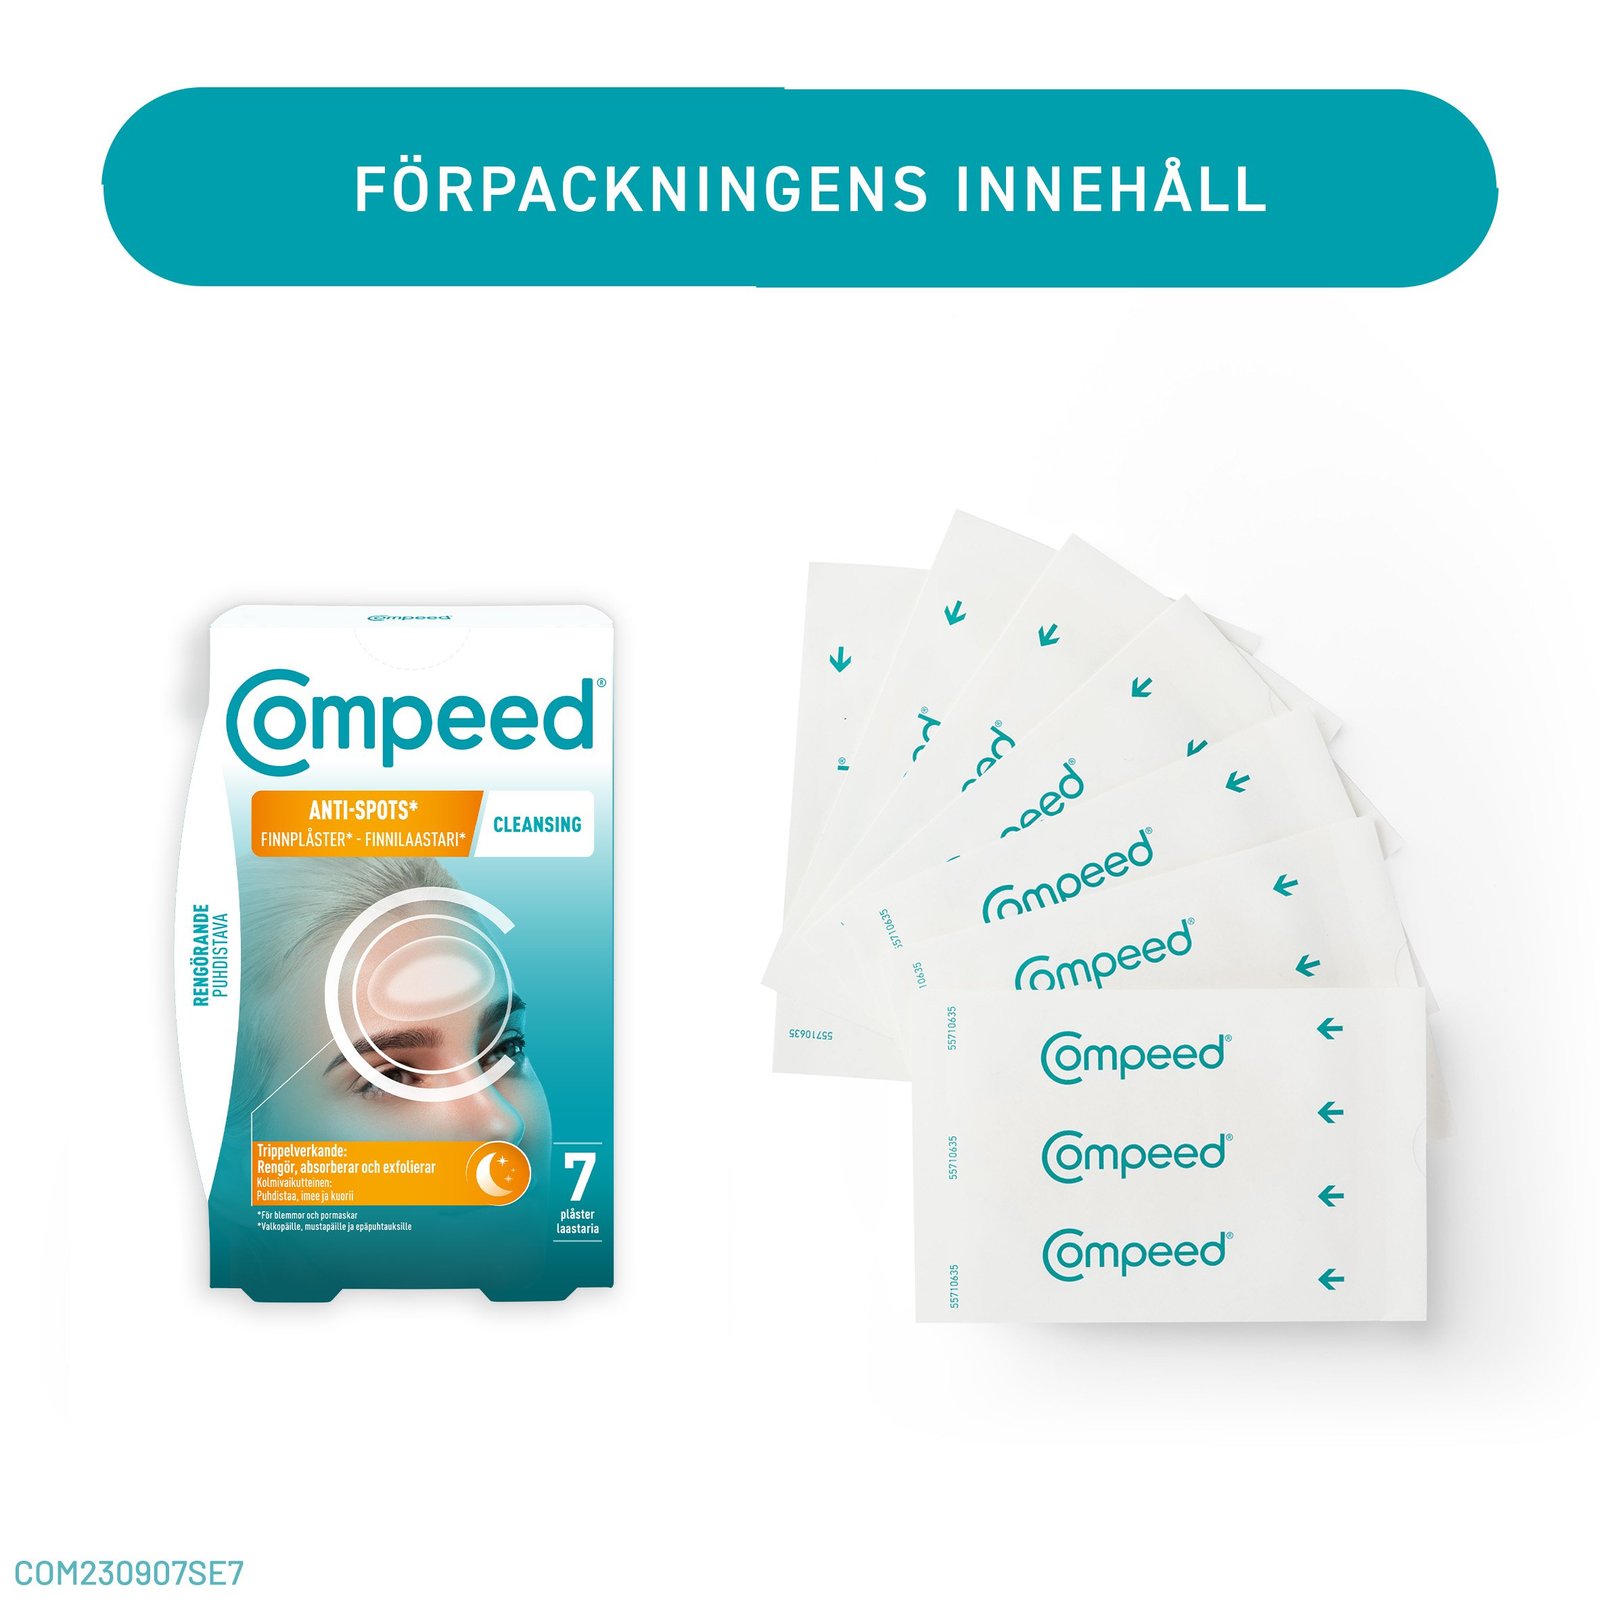 Compeed Anti-Spots Cleansing Finnplåster 7 st